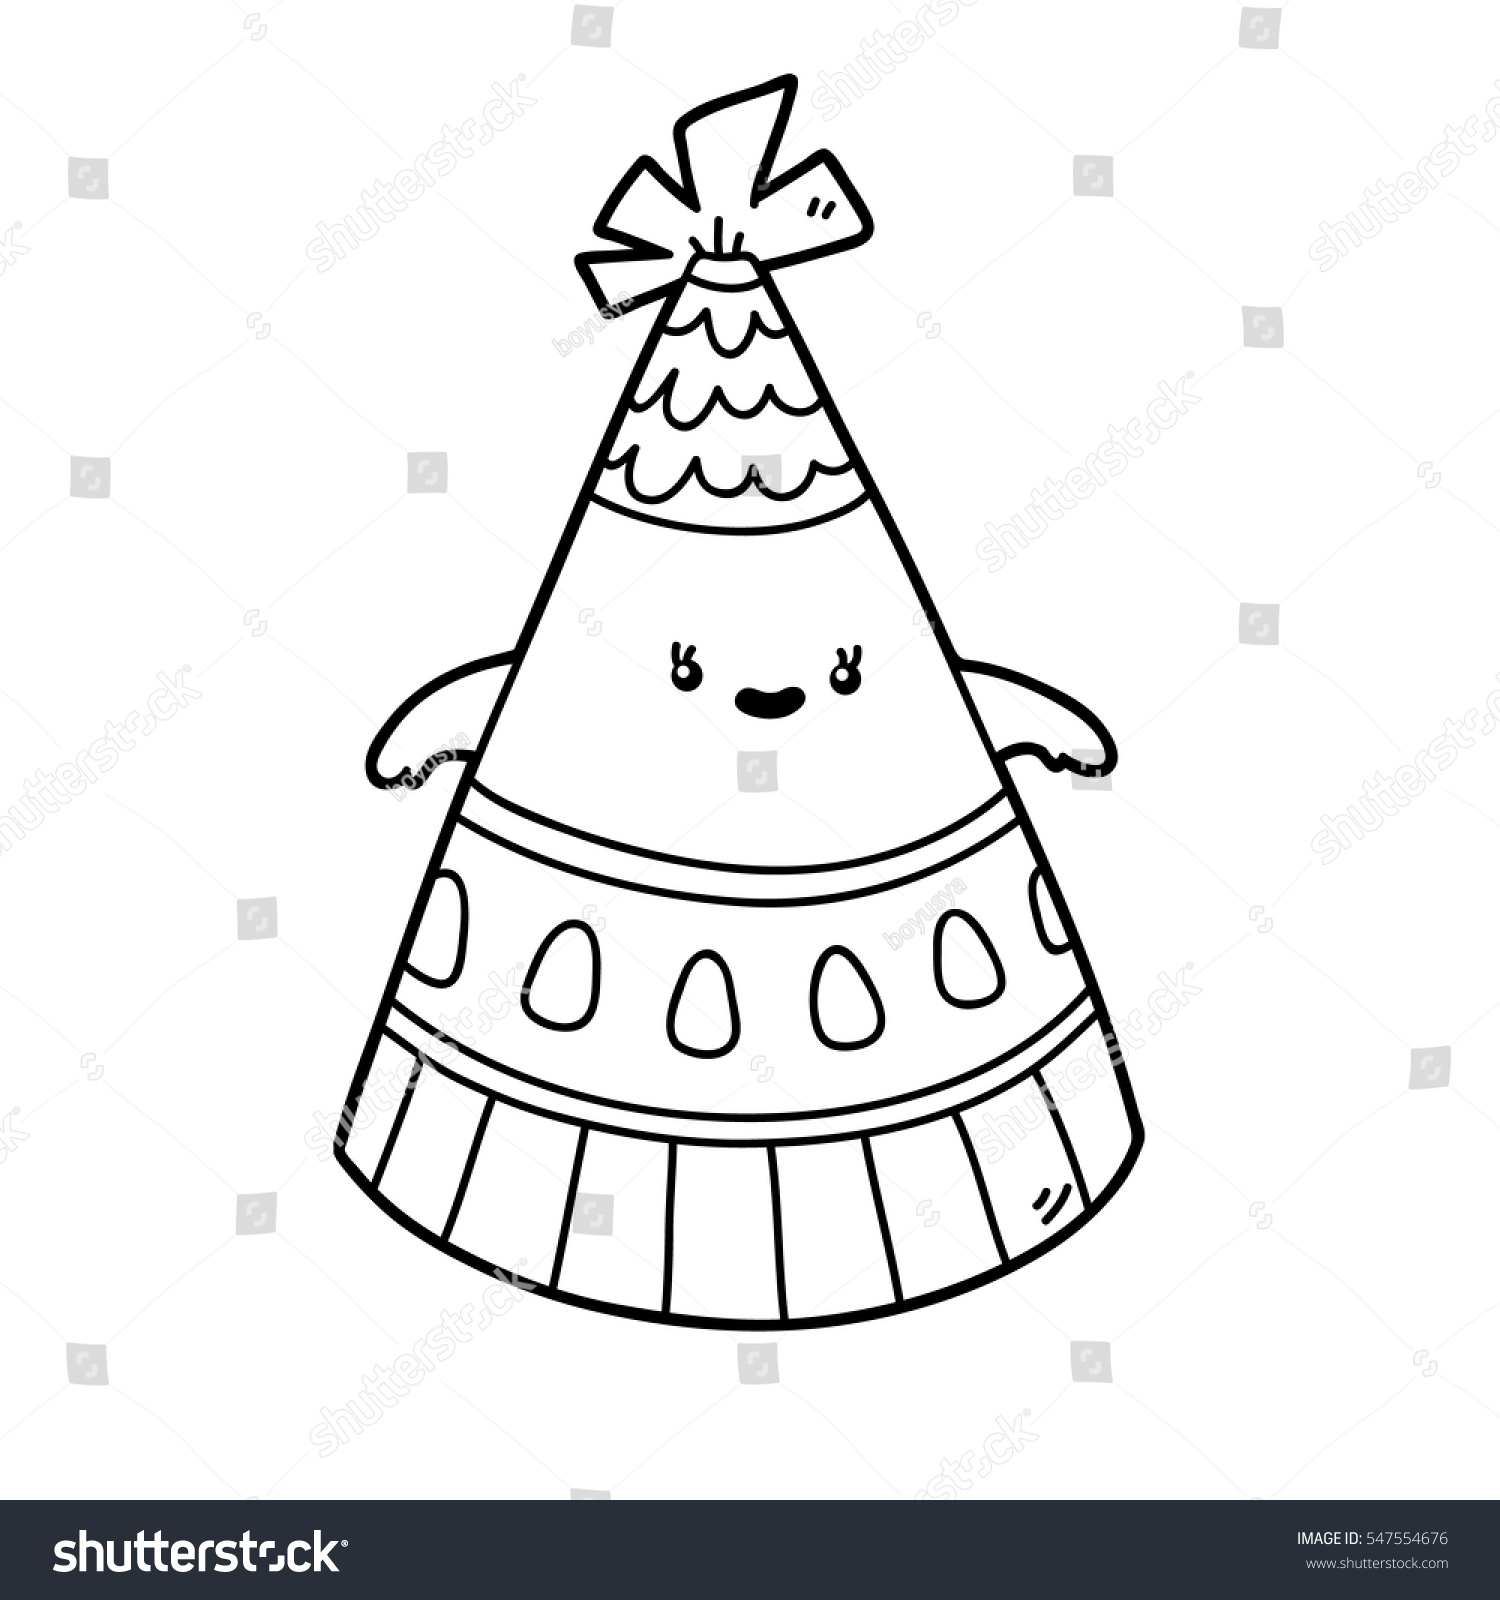 Vector illustration of cute cartoon party hat character for children coloring page